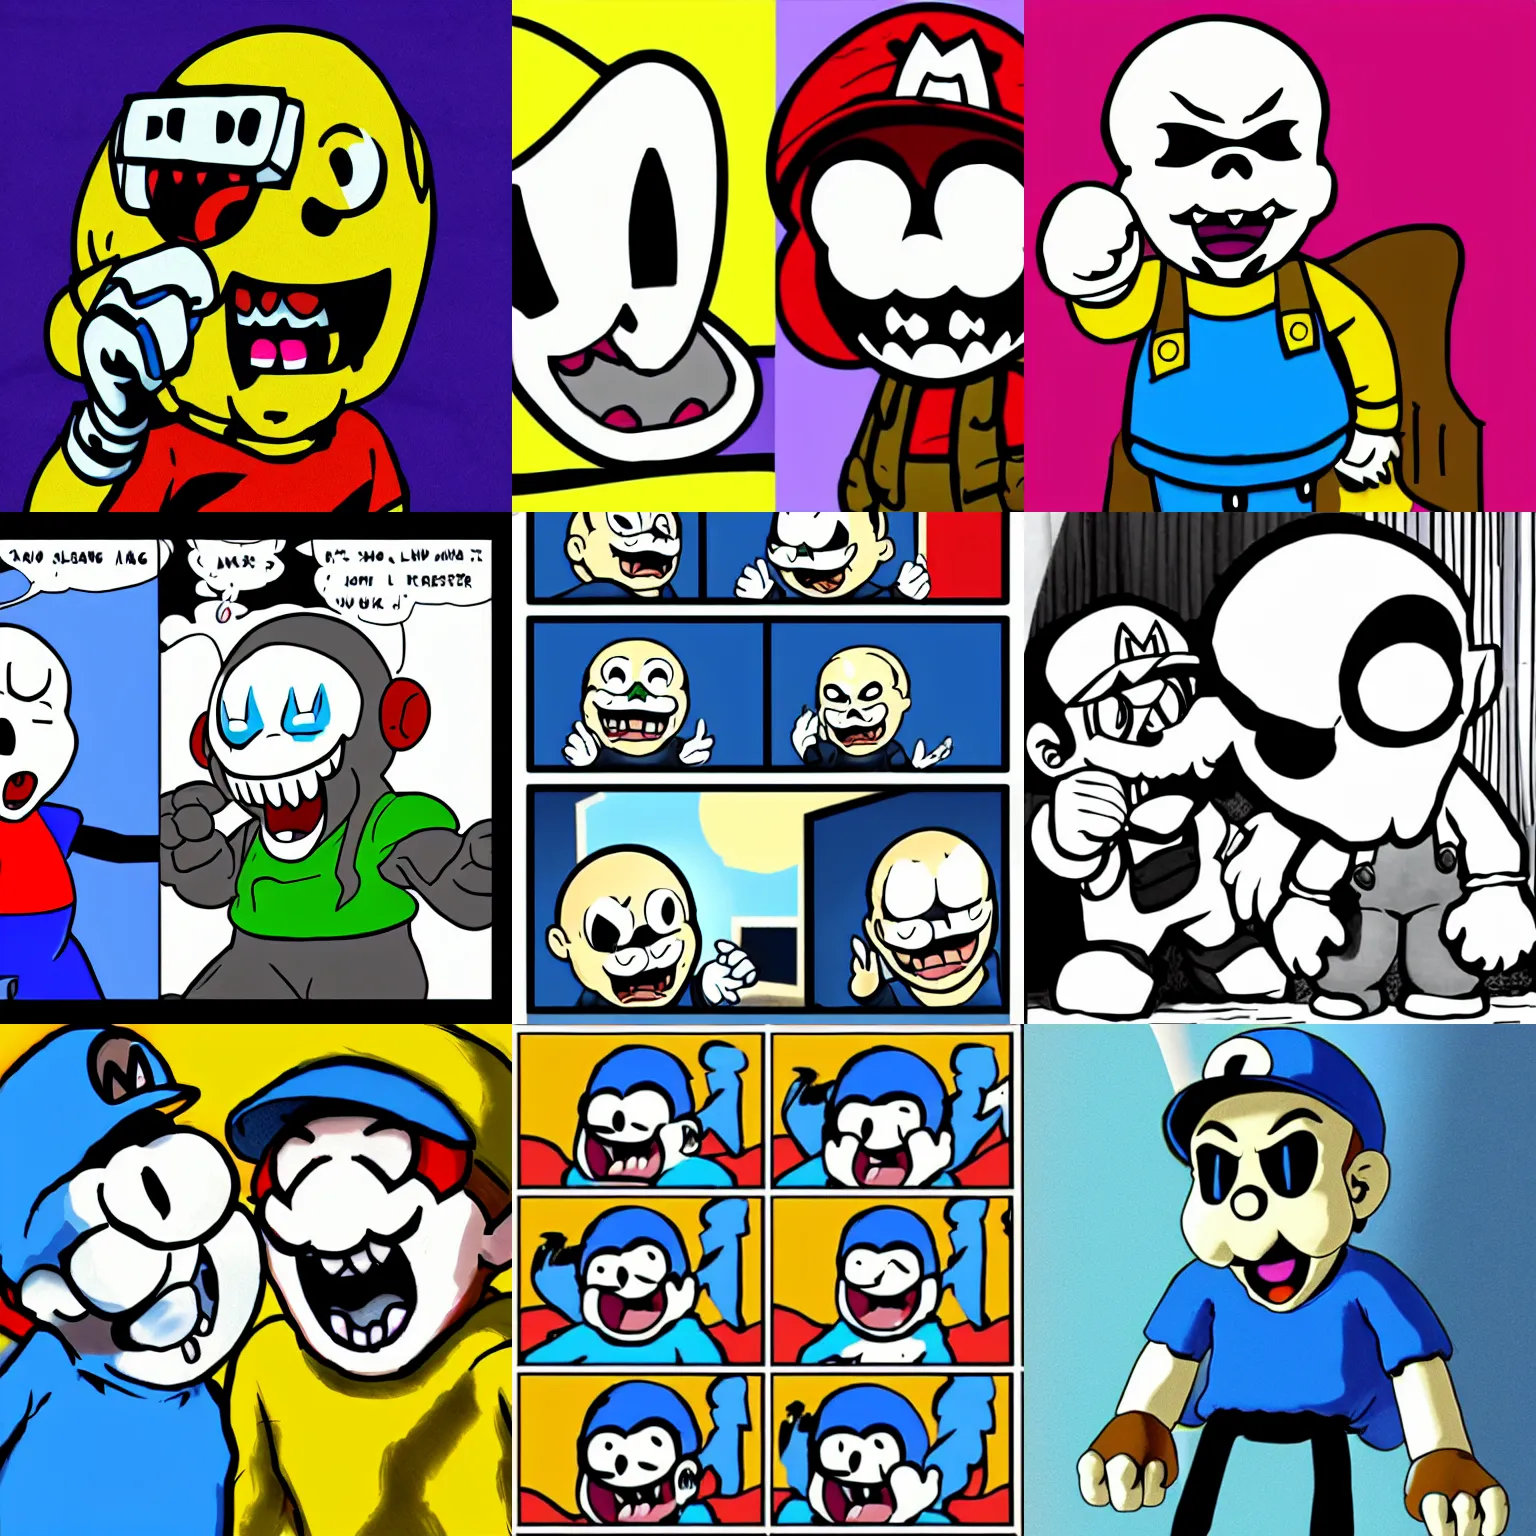 Prompt: sans from undertale screaming at mario, who is also screaming